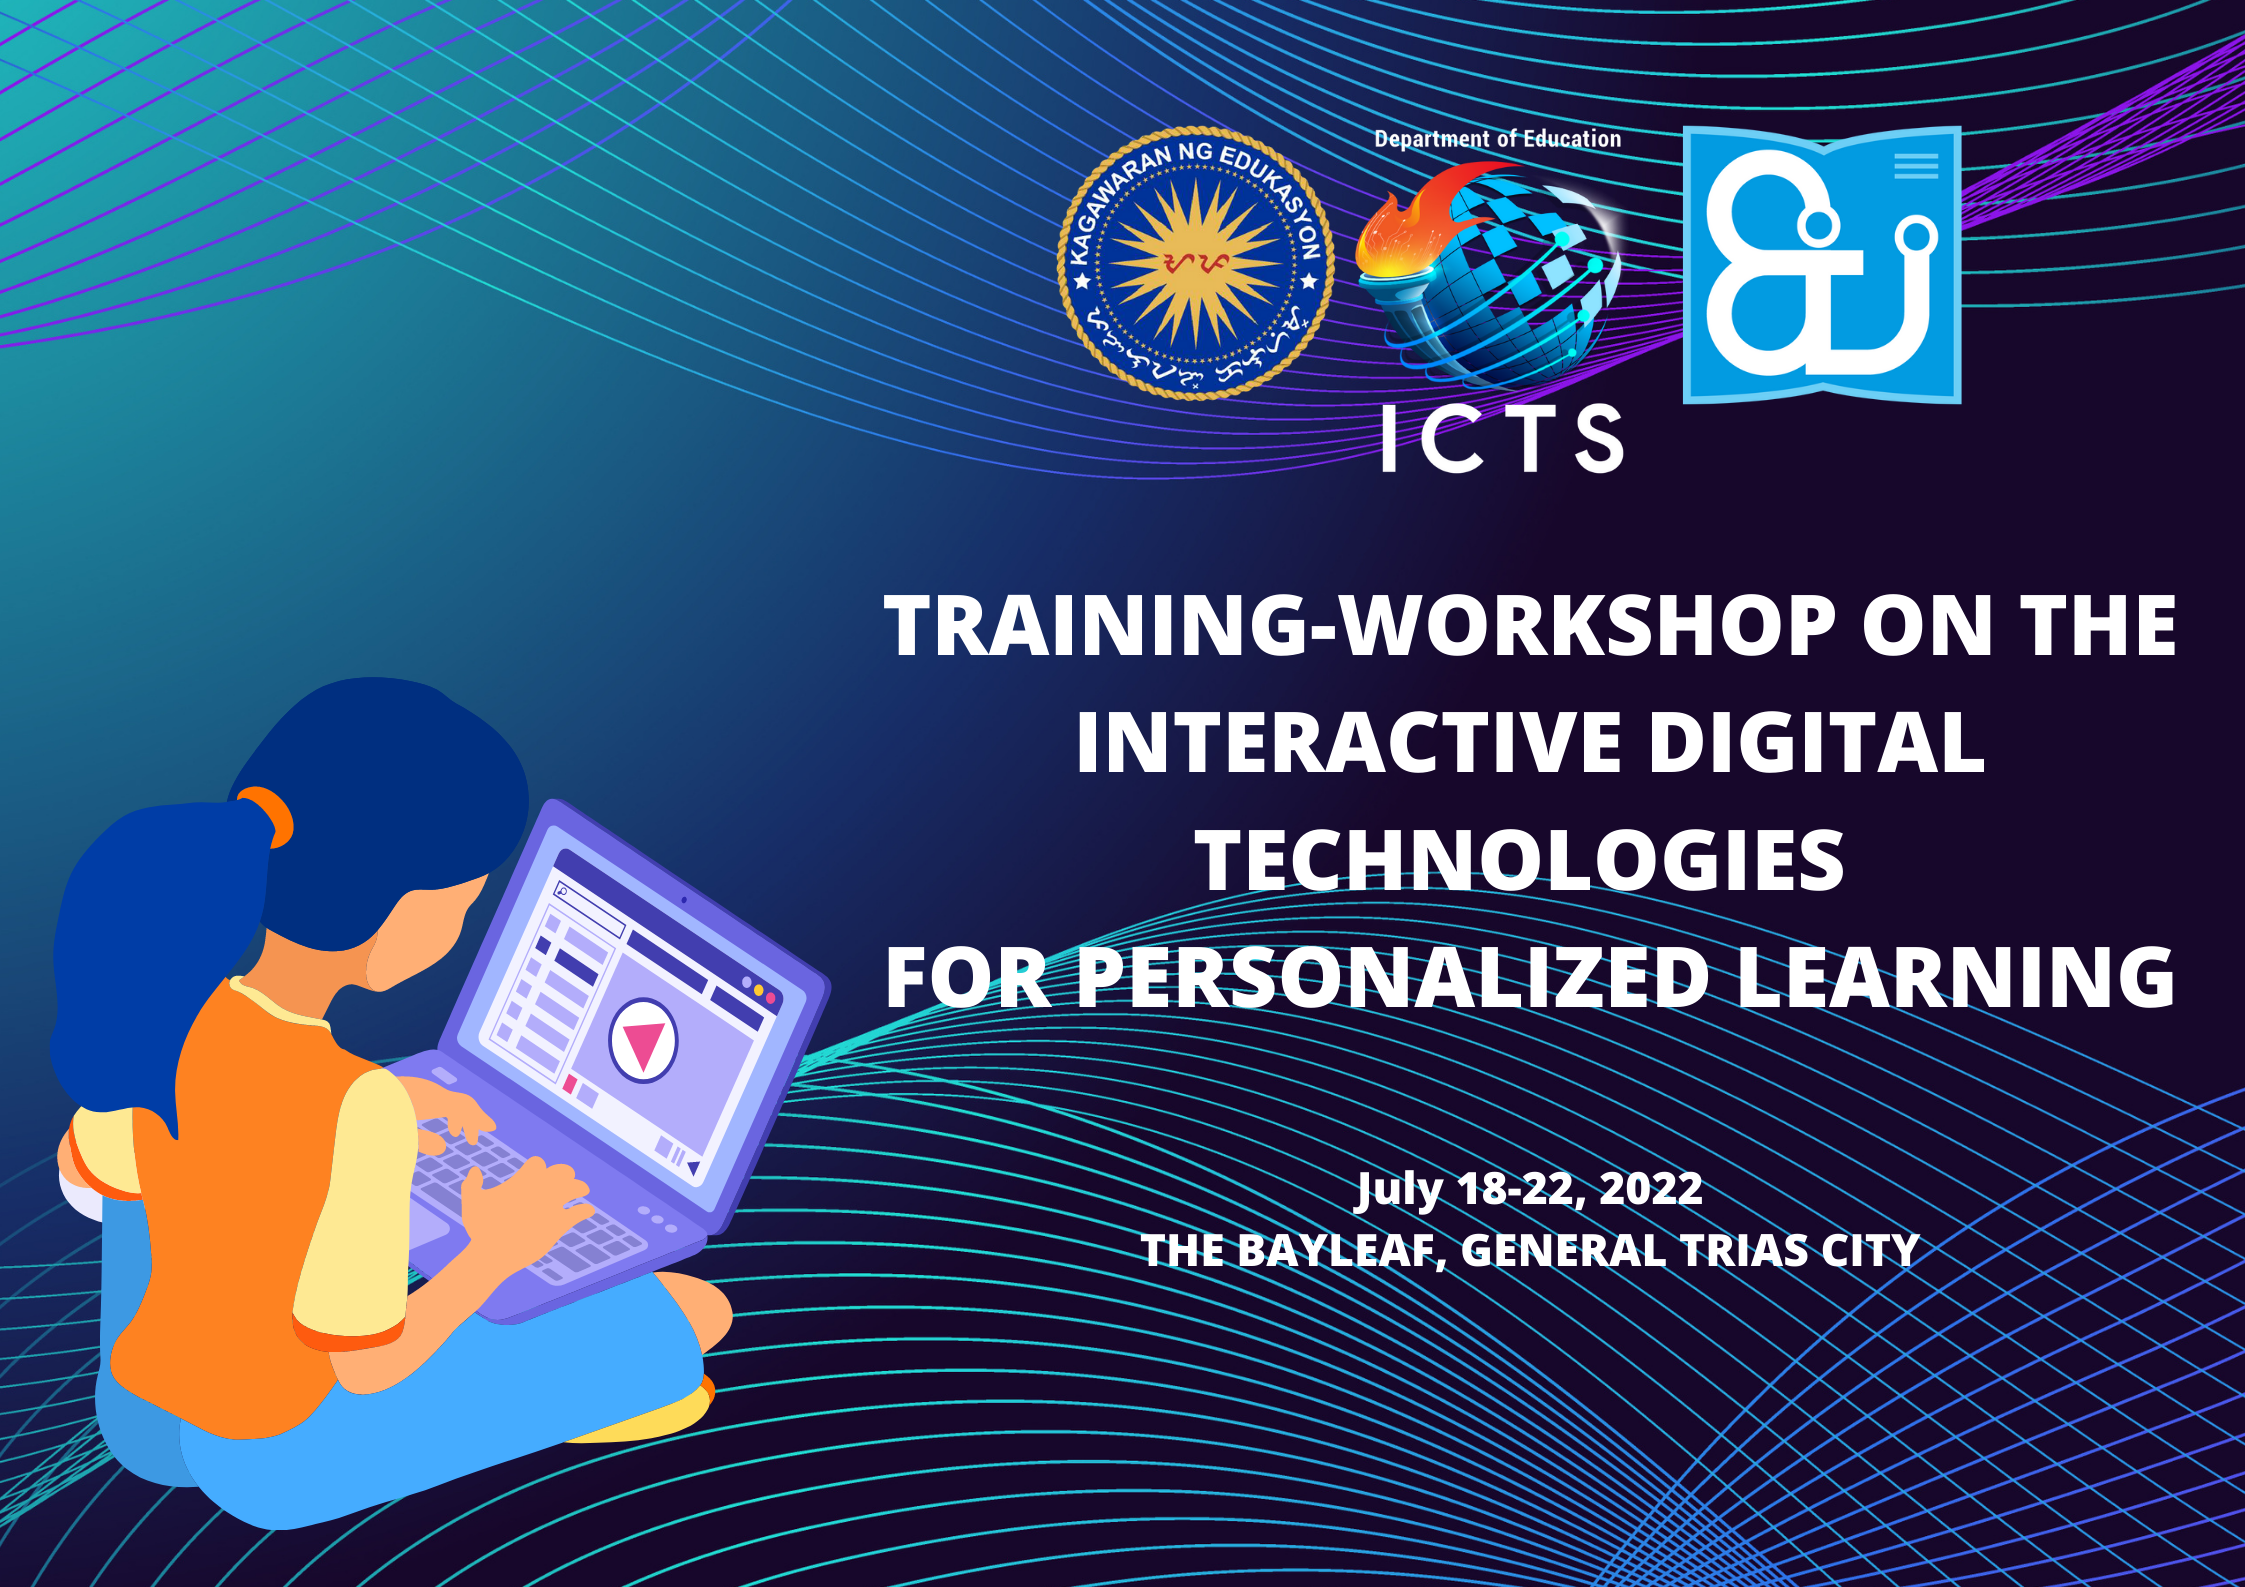 Division Training Workshop on Interactive Digital Technologies for Personalized Learning